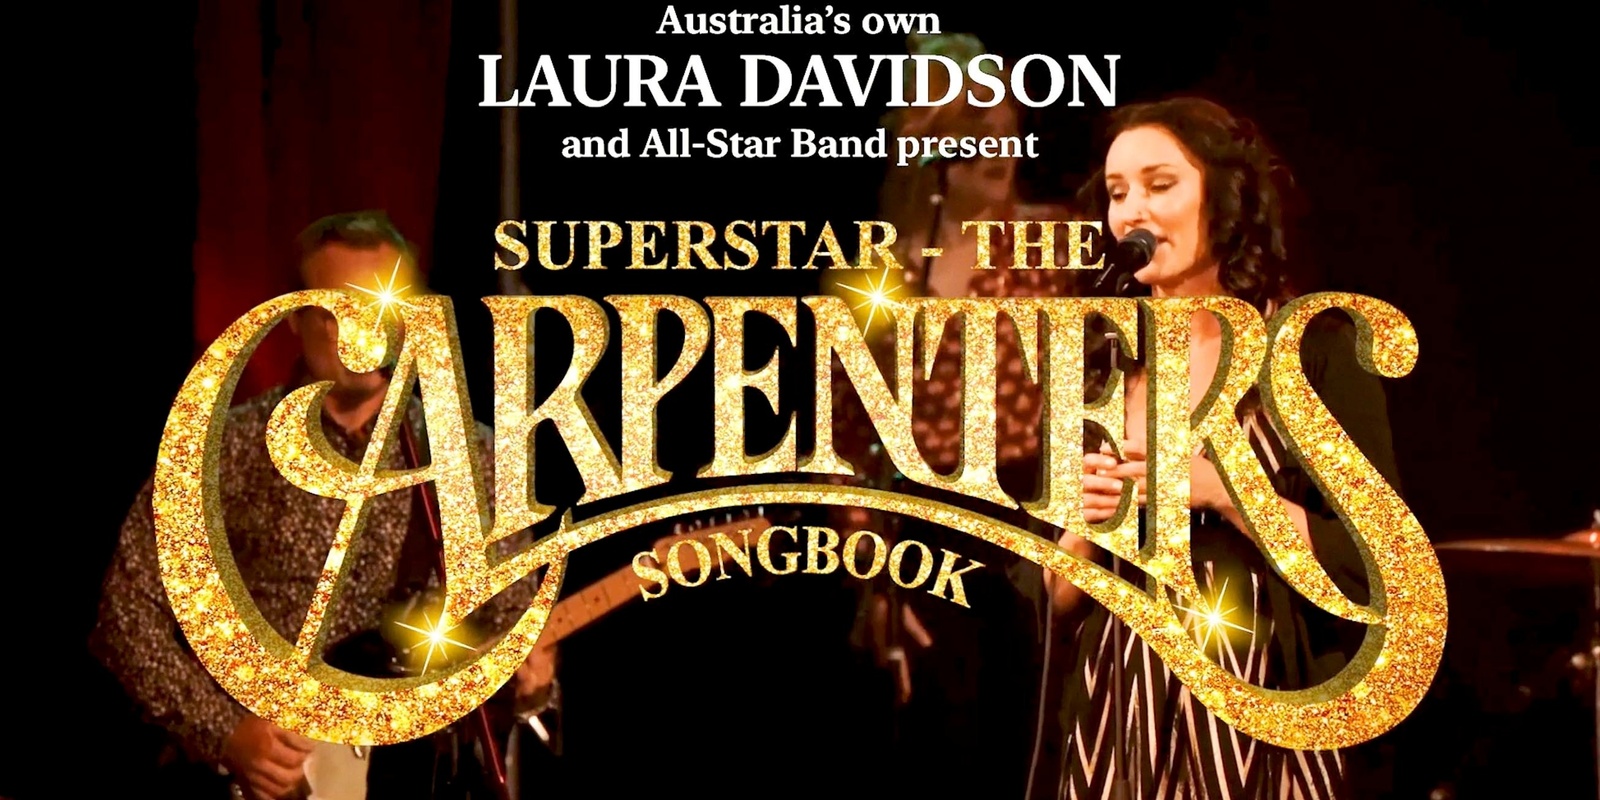 Banner image for Superstar - The Carpenters Songbook